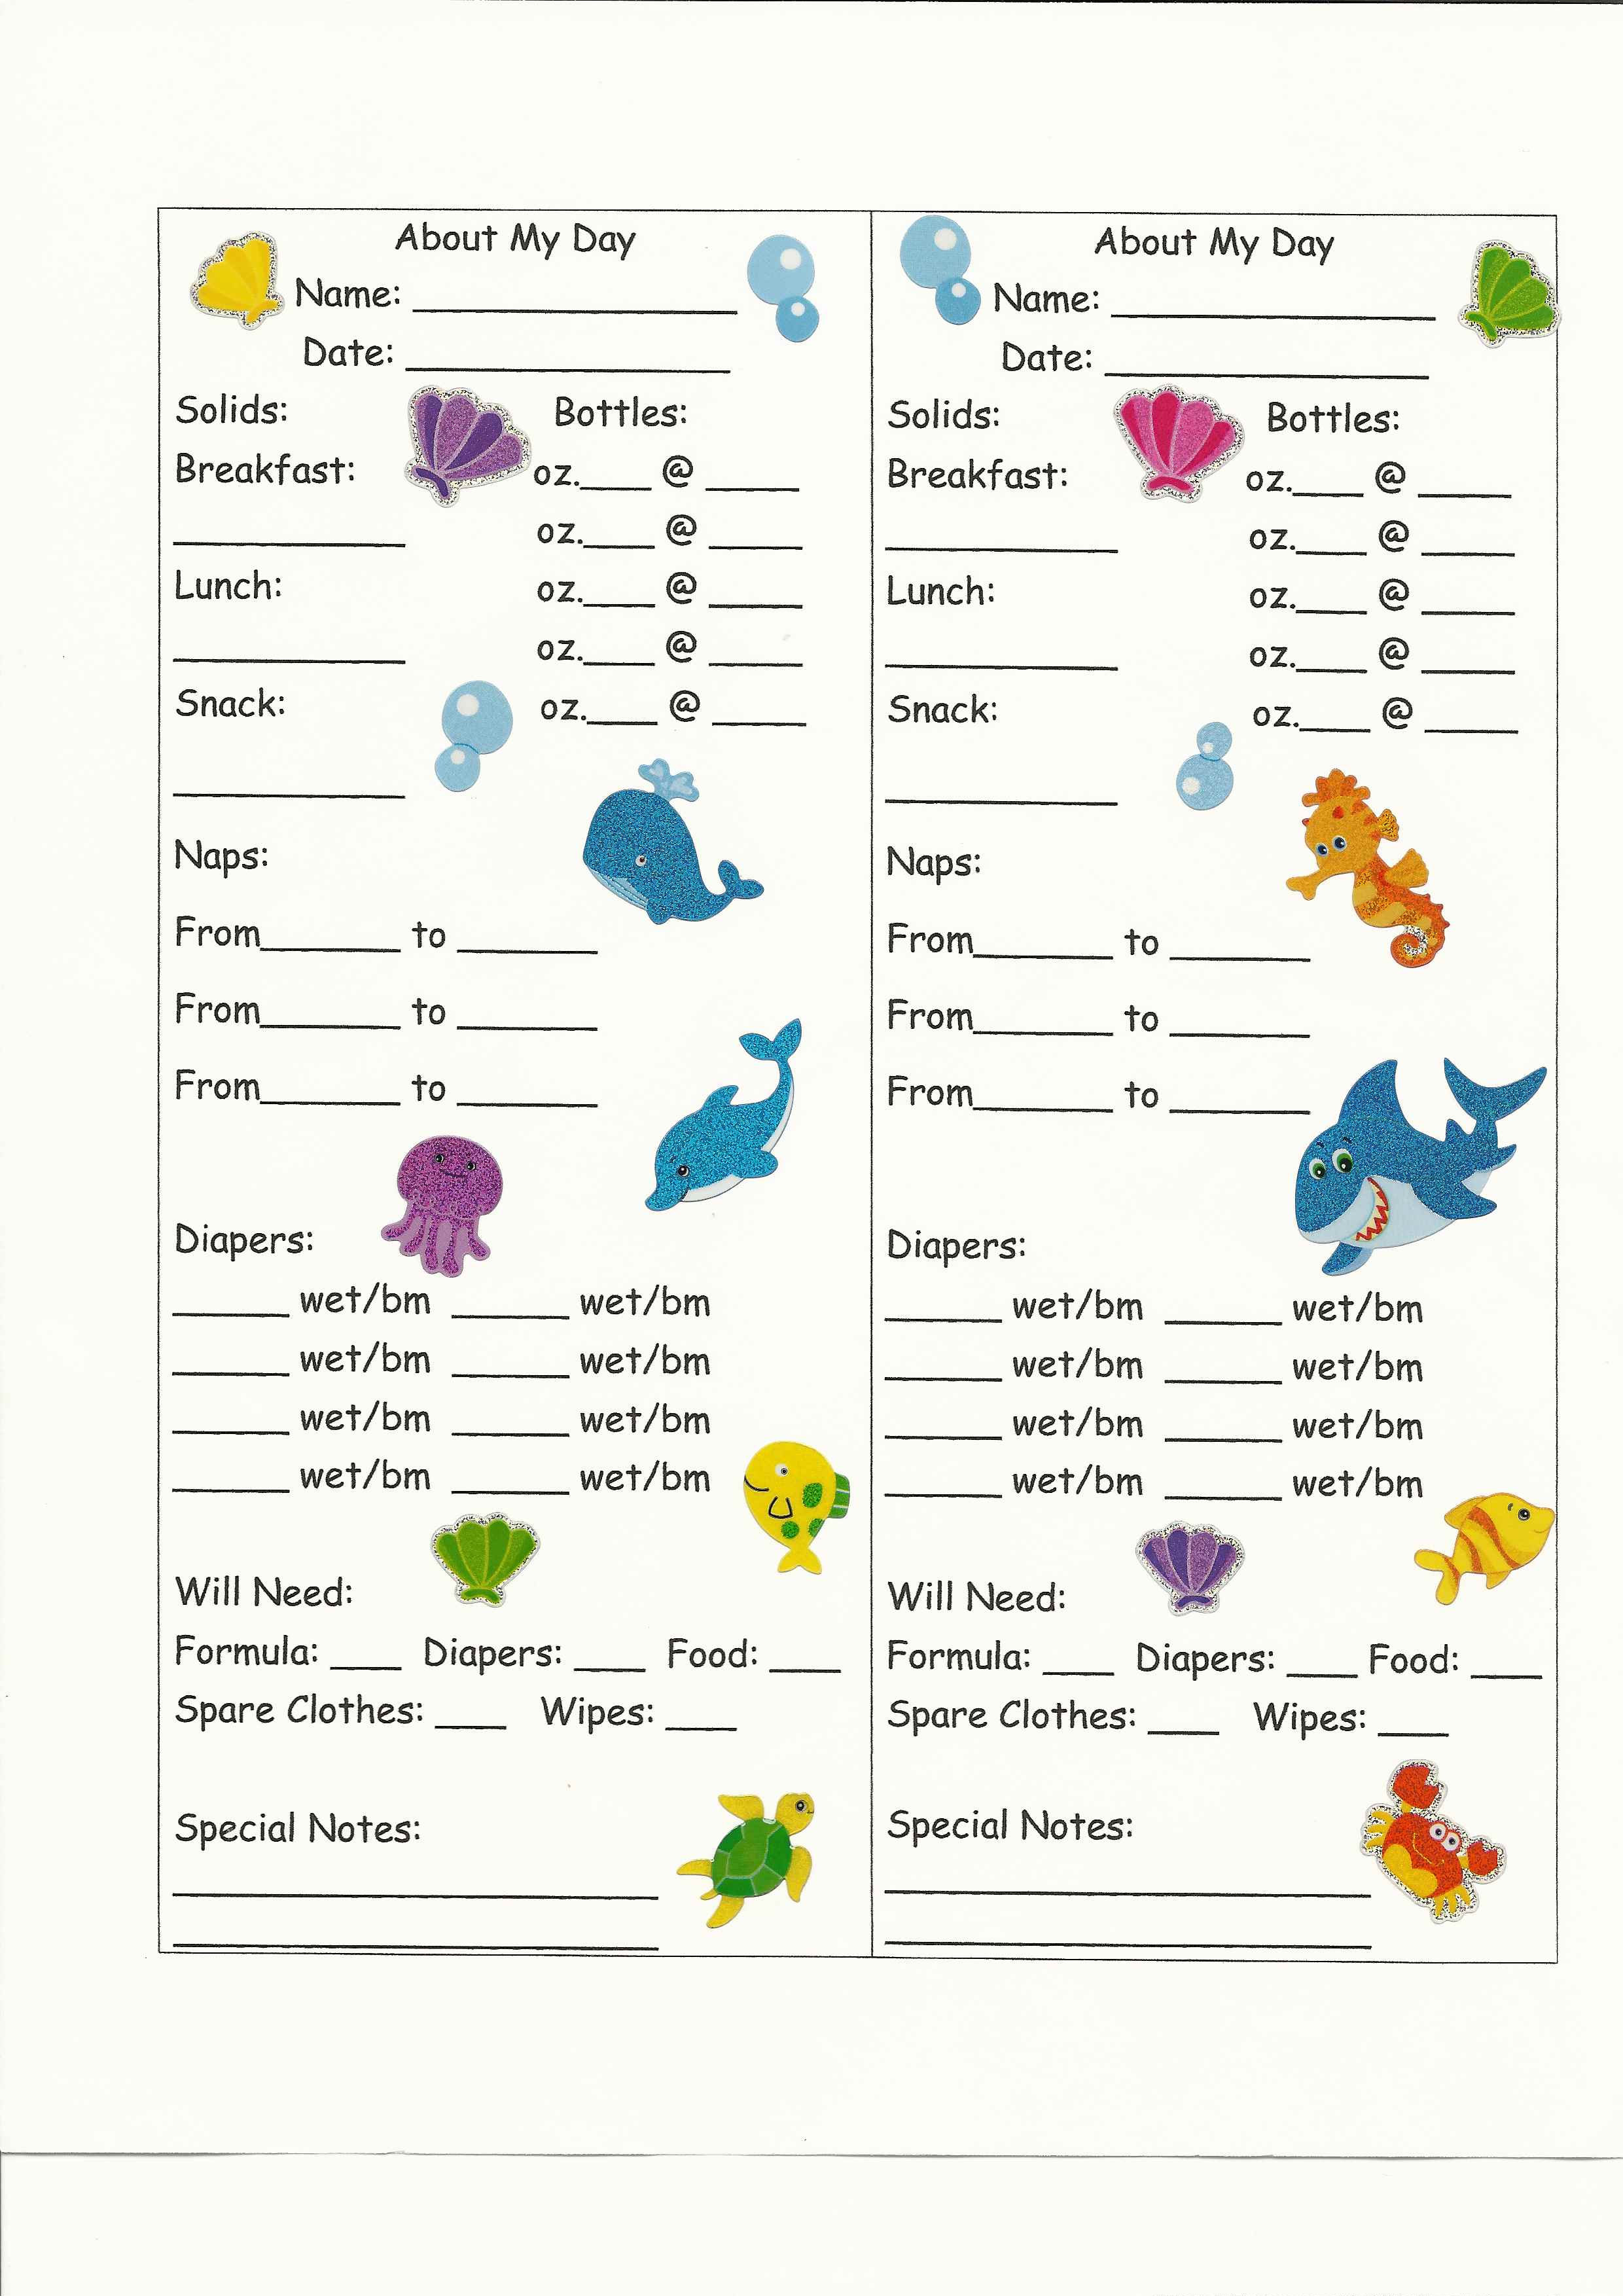 free-printable-infant-daily-sheets-toddler-daily-report-child-care